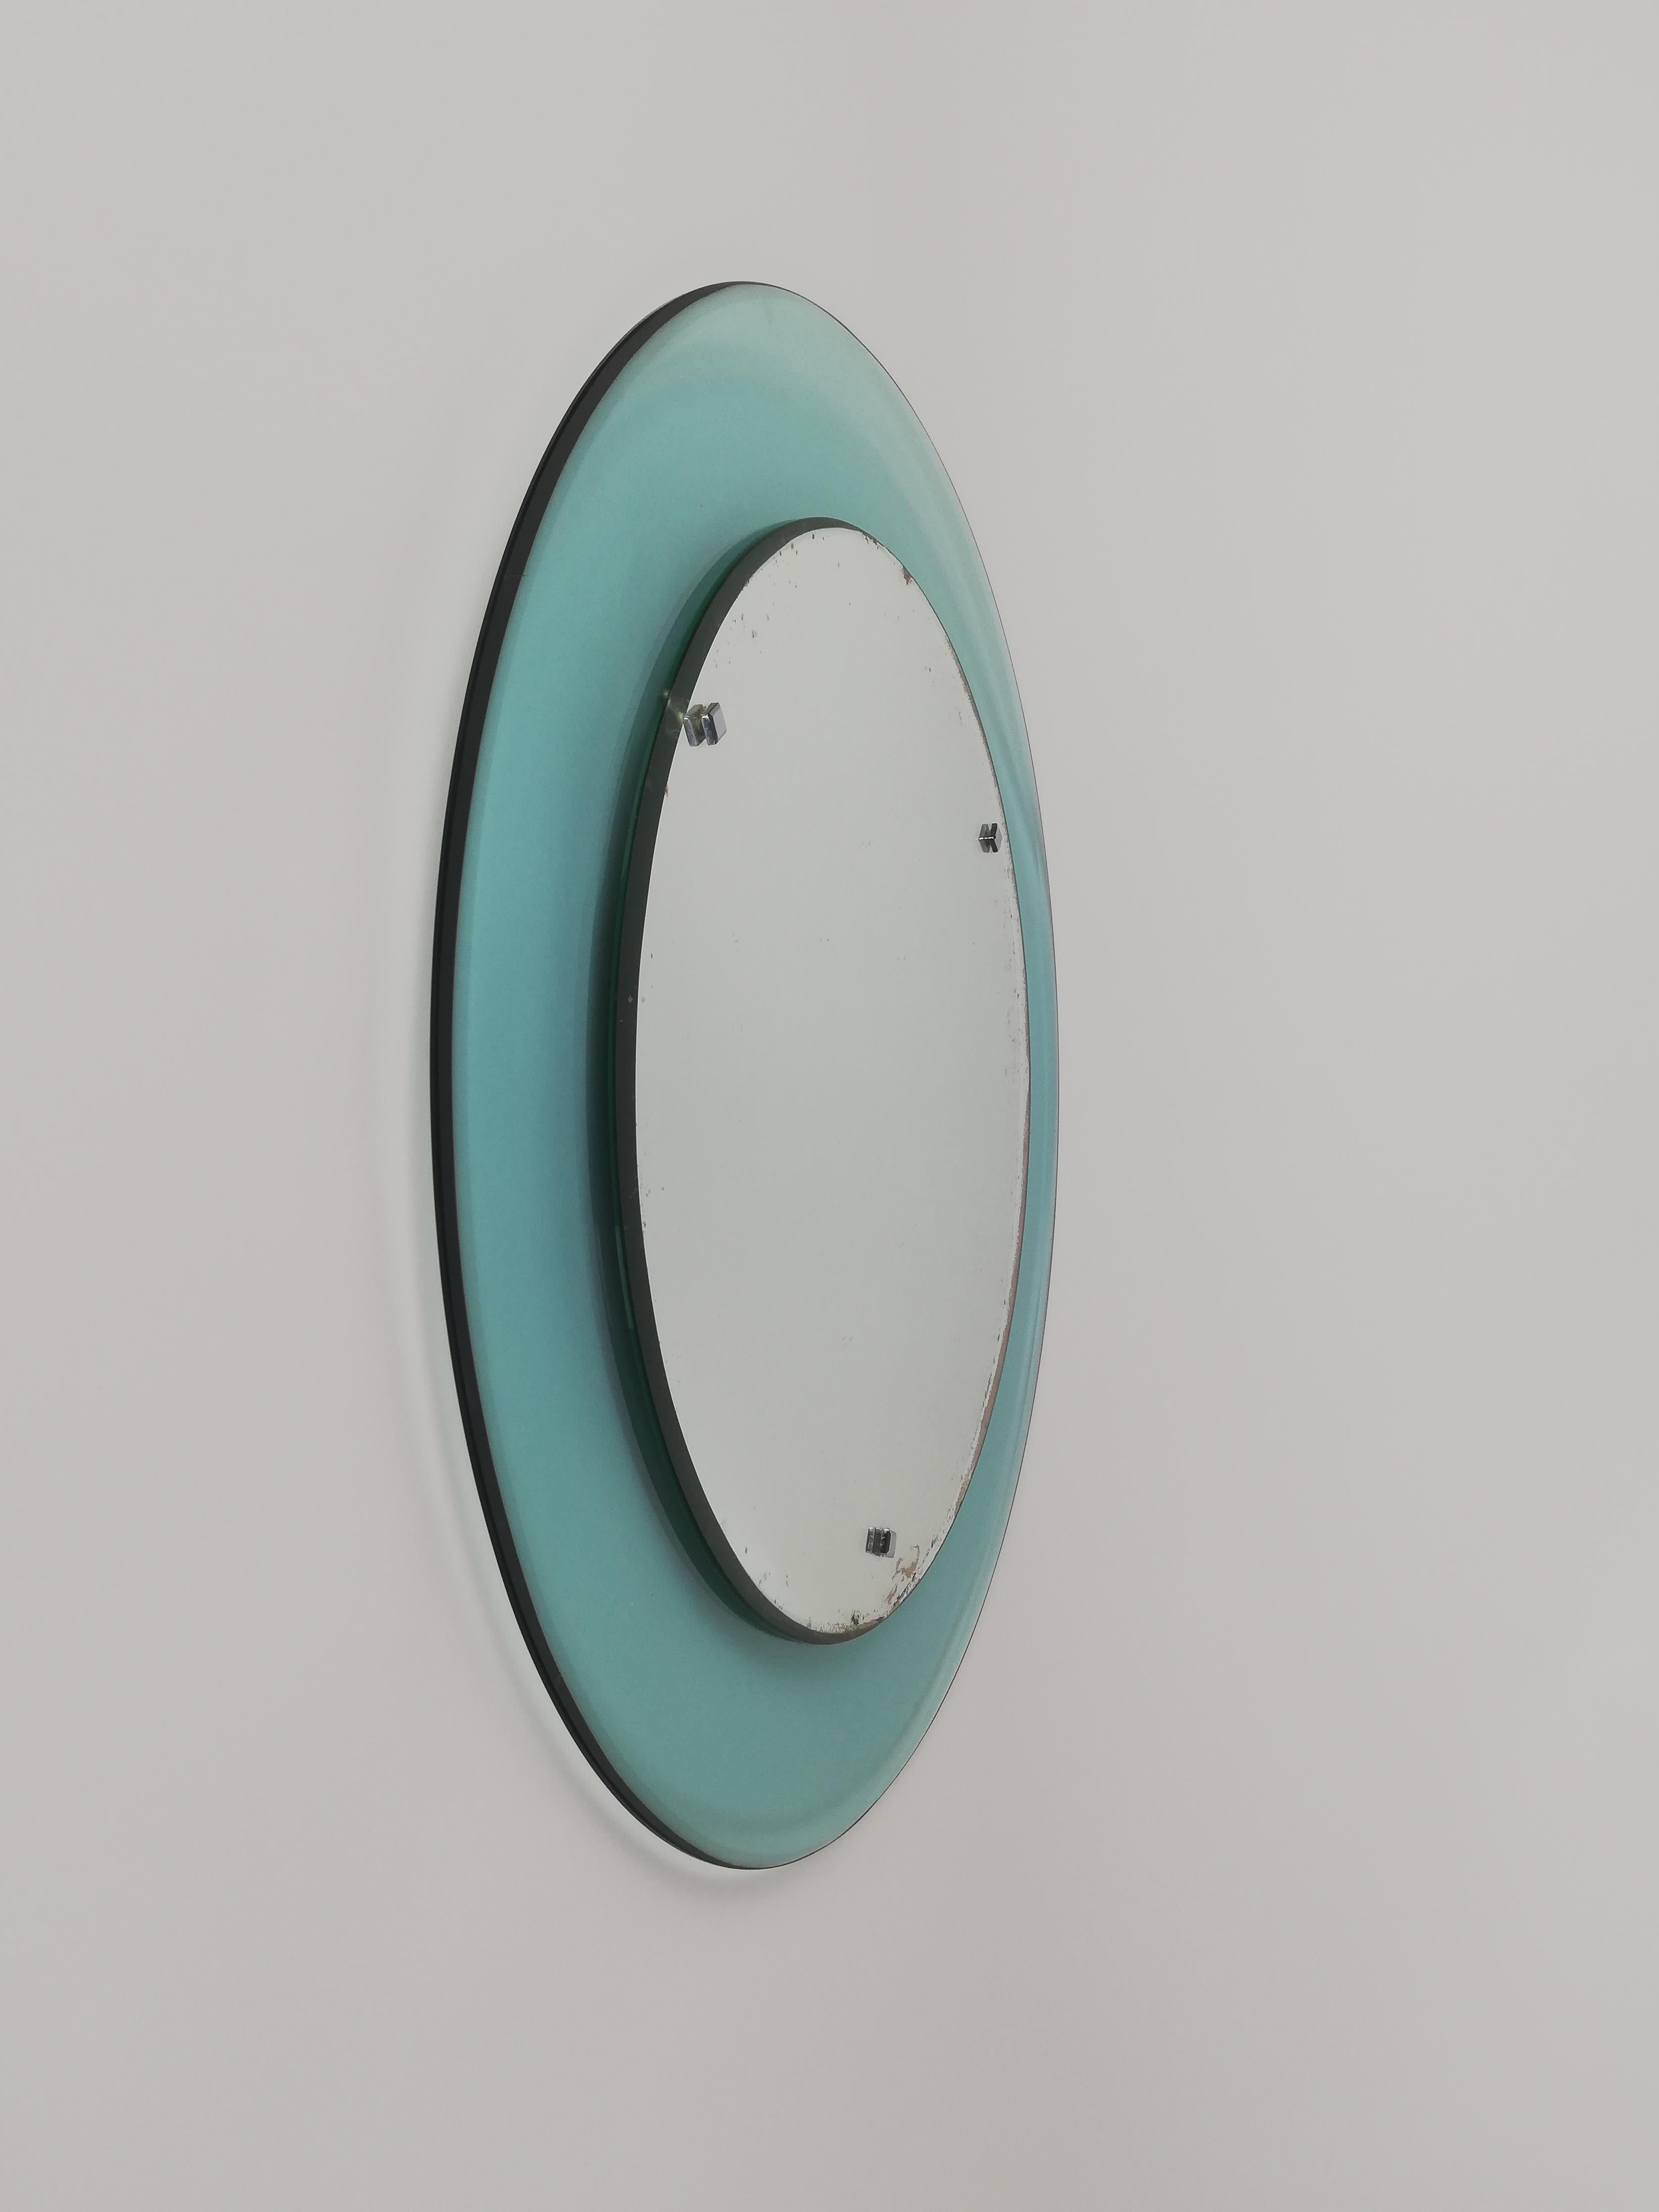 20th Century Midcentury Rounded Mirror in Turquois Glass Attributable to Veca, Italy, 1970s For Sale